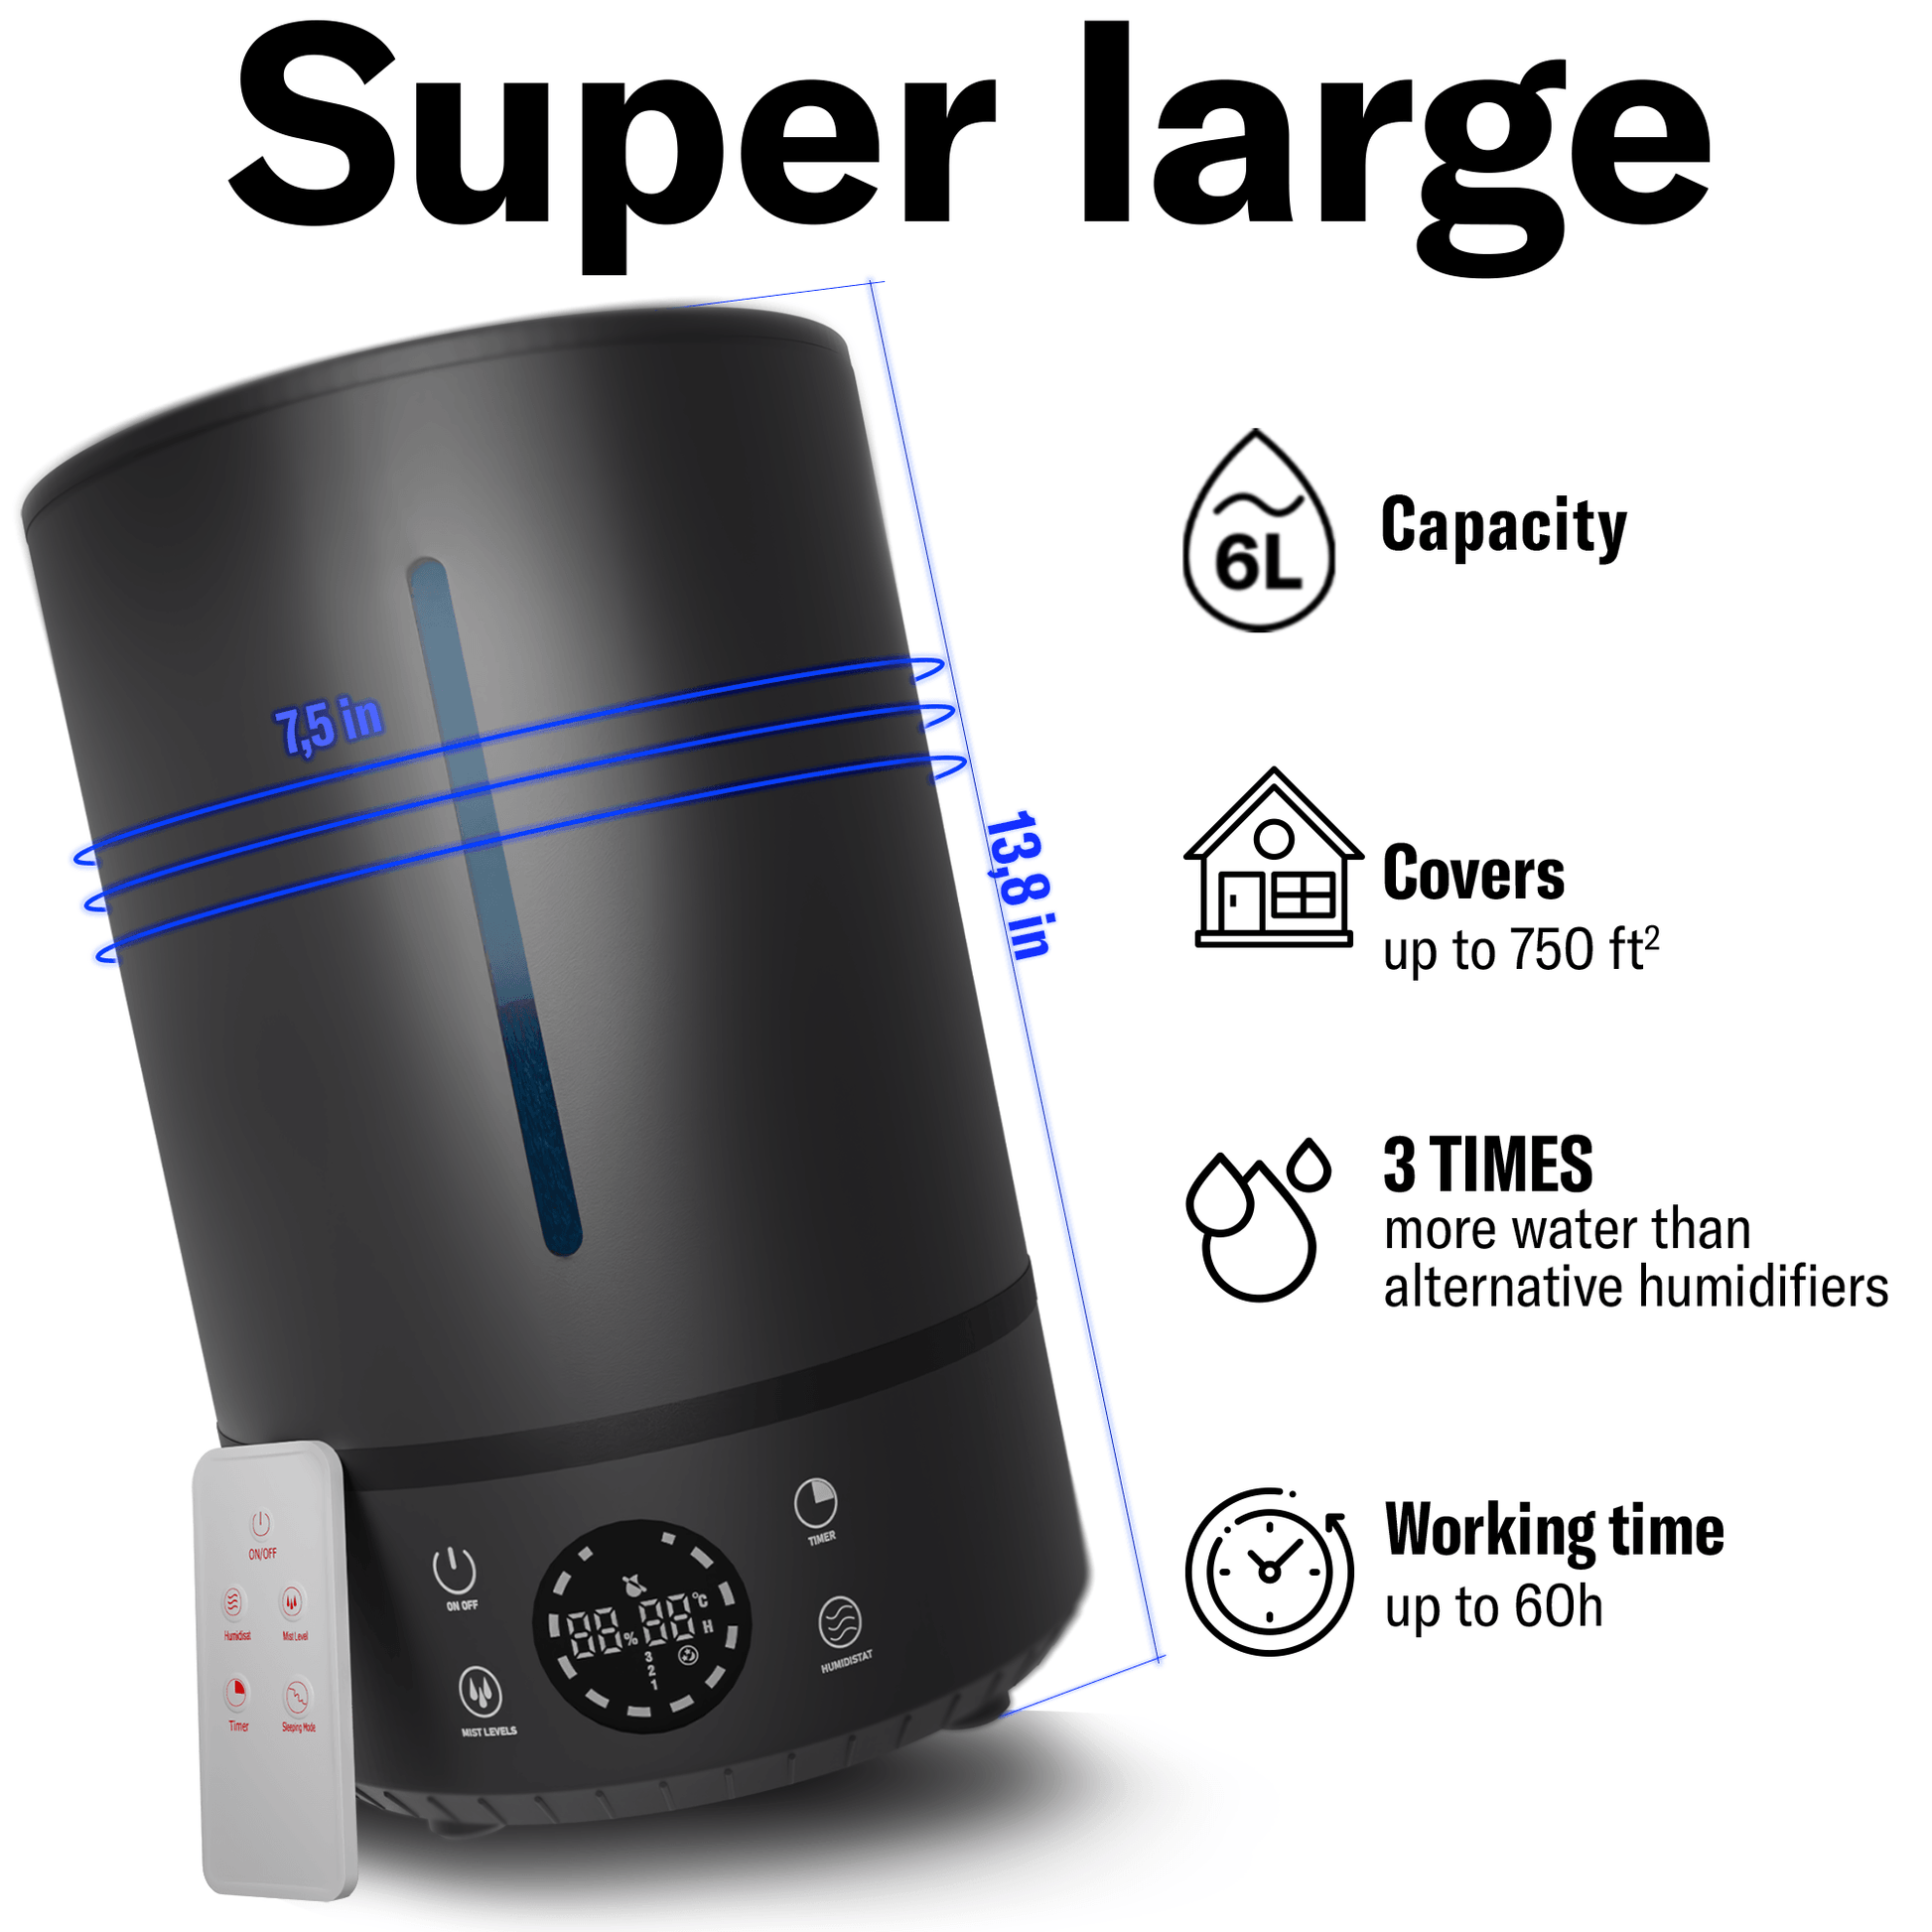 LazyClimate - 6L Large Room Home Ultrasonic Humidifier: Top Fill, 6L Capacity, 360° Mist, Quiet for Babies - Lazy Pro